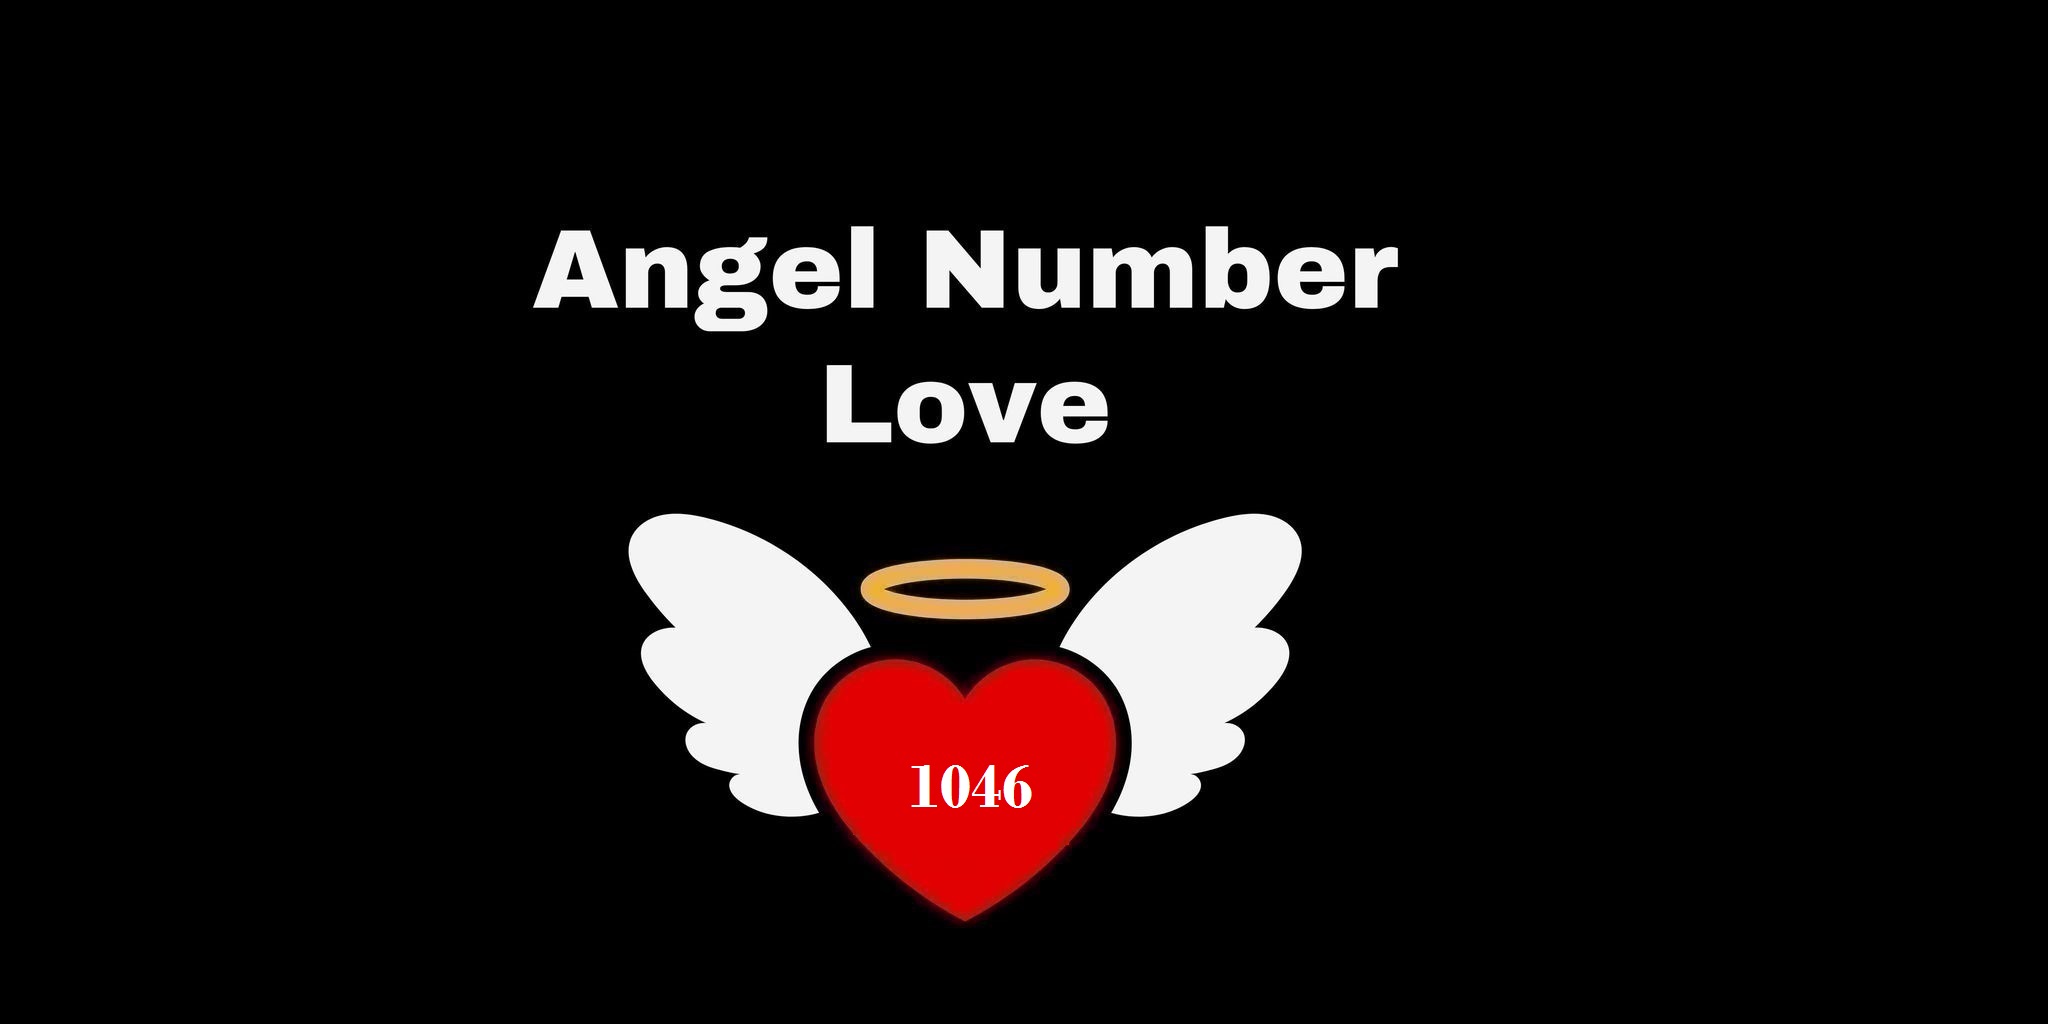 1046 Angel Number Meaning In Love